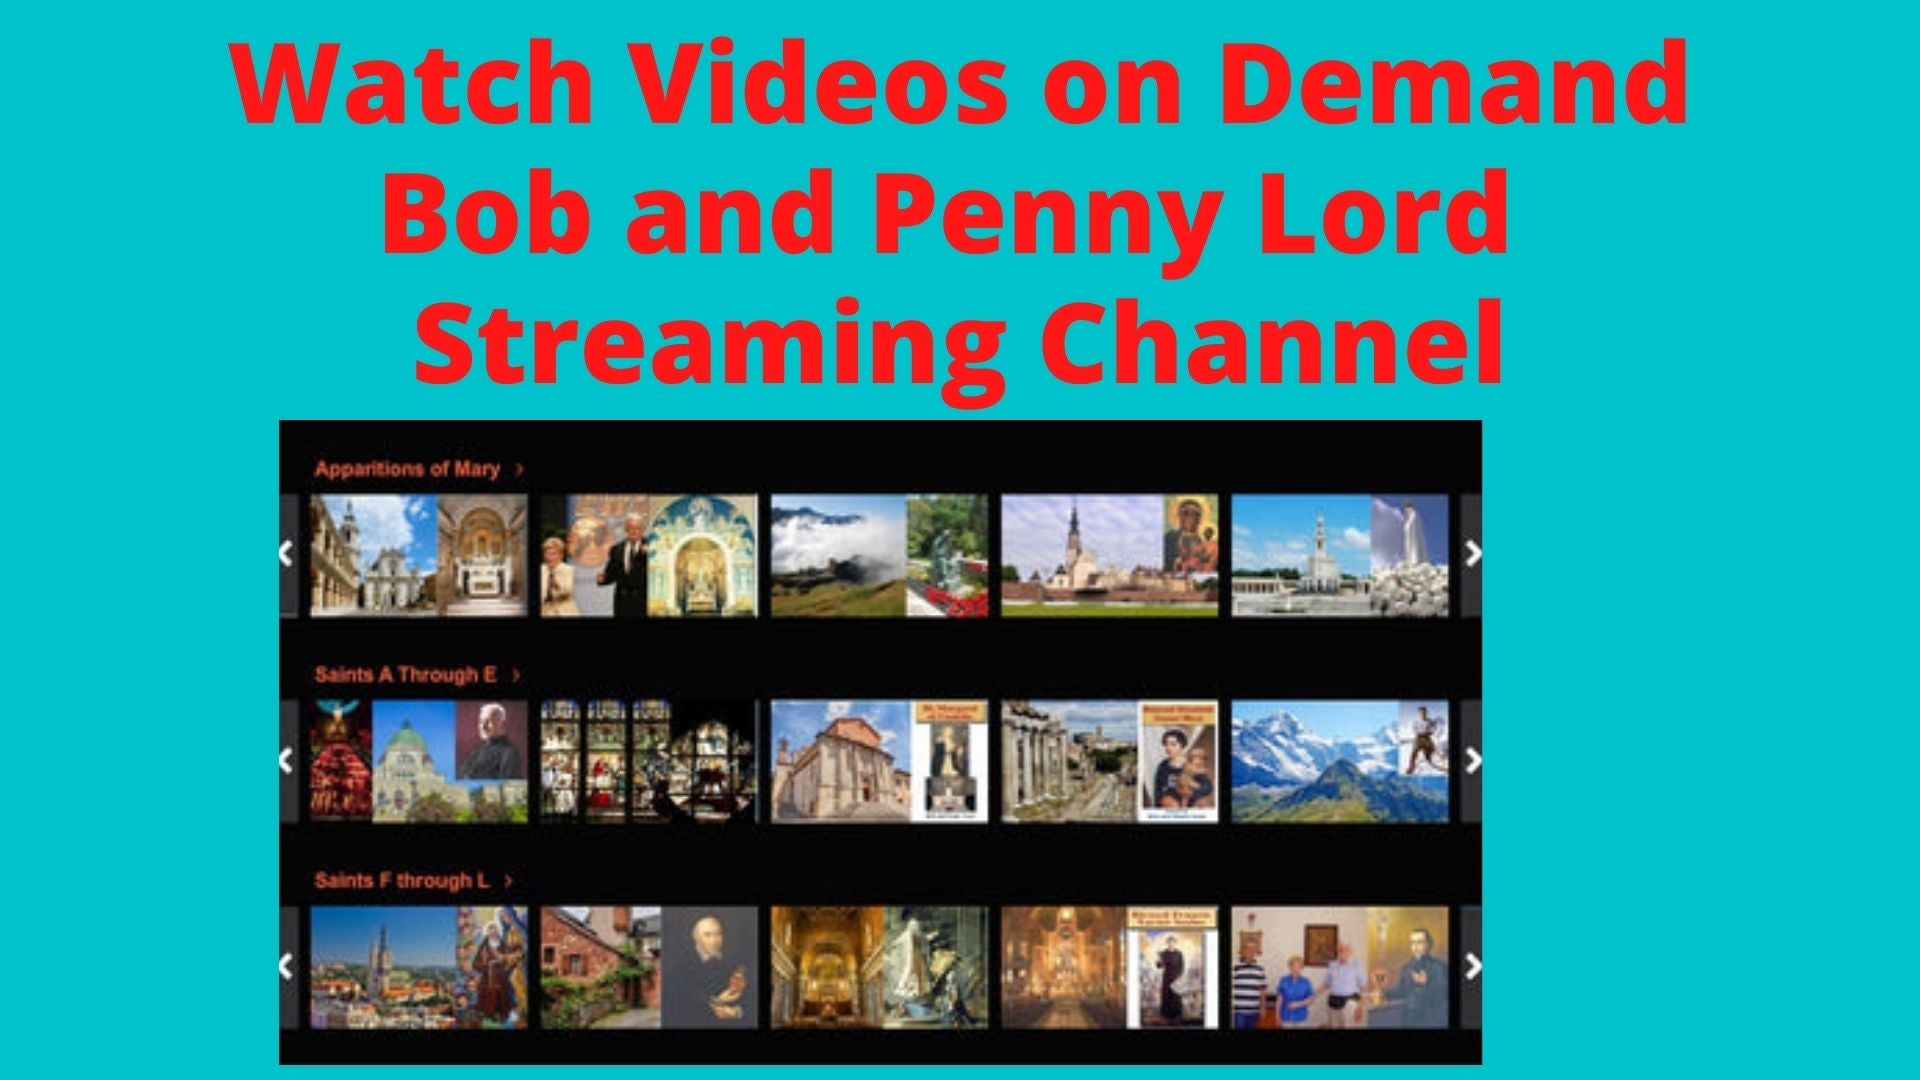 Quarterly Subscription to Bob and Penny Lord TV Channel - Bob and Penny Lord